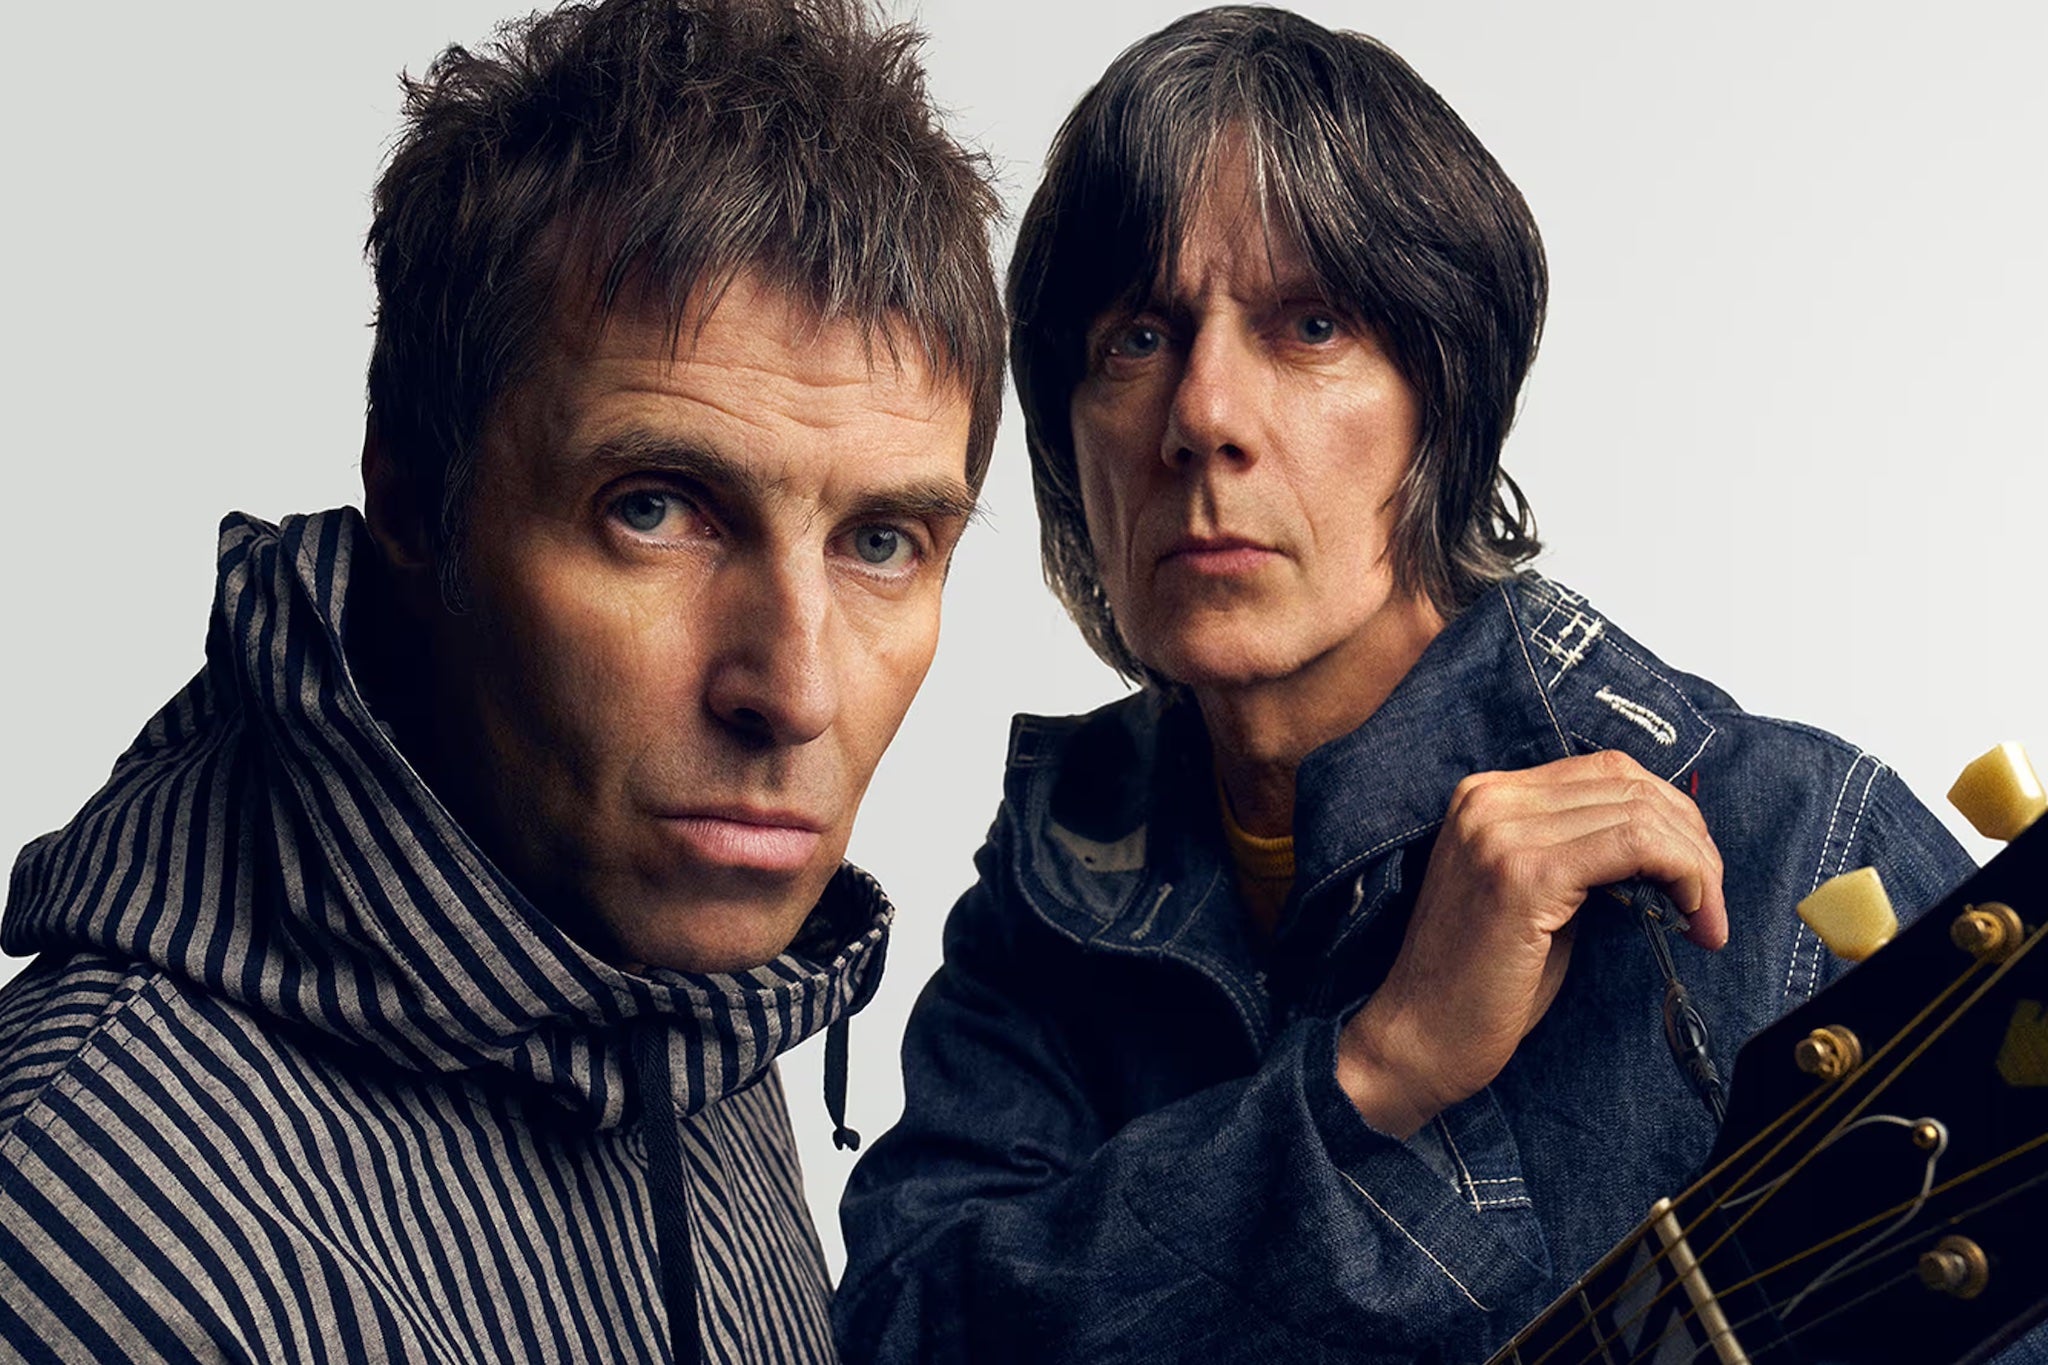 Liam Gallagher and John Squire release their self-titled debut album